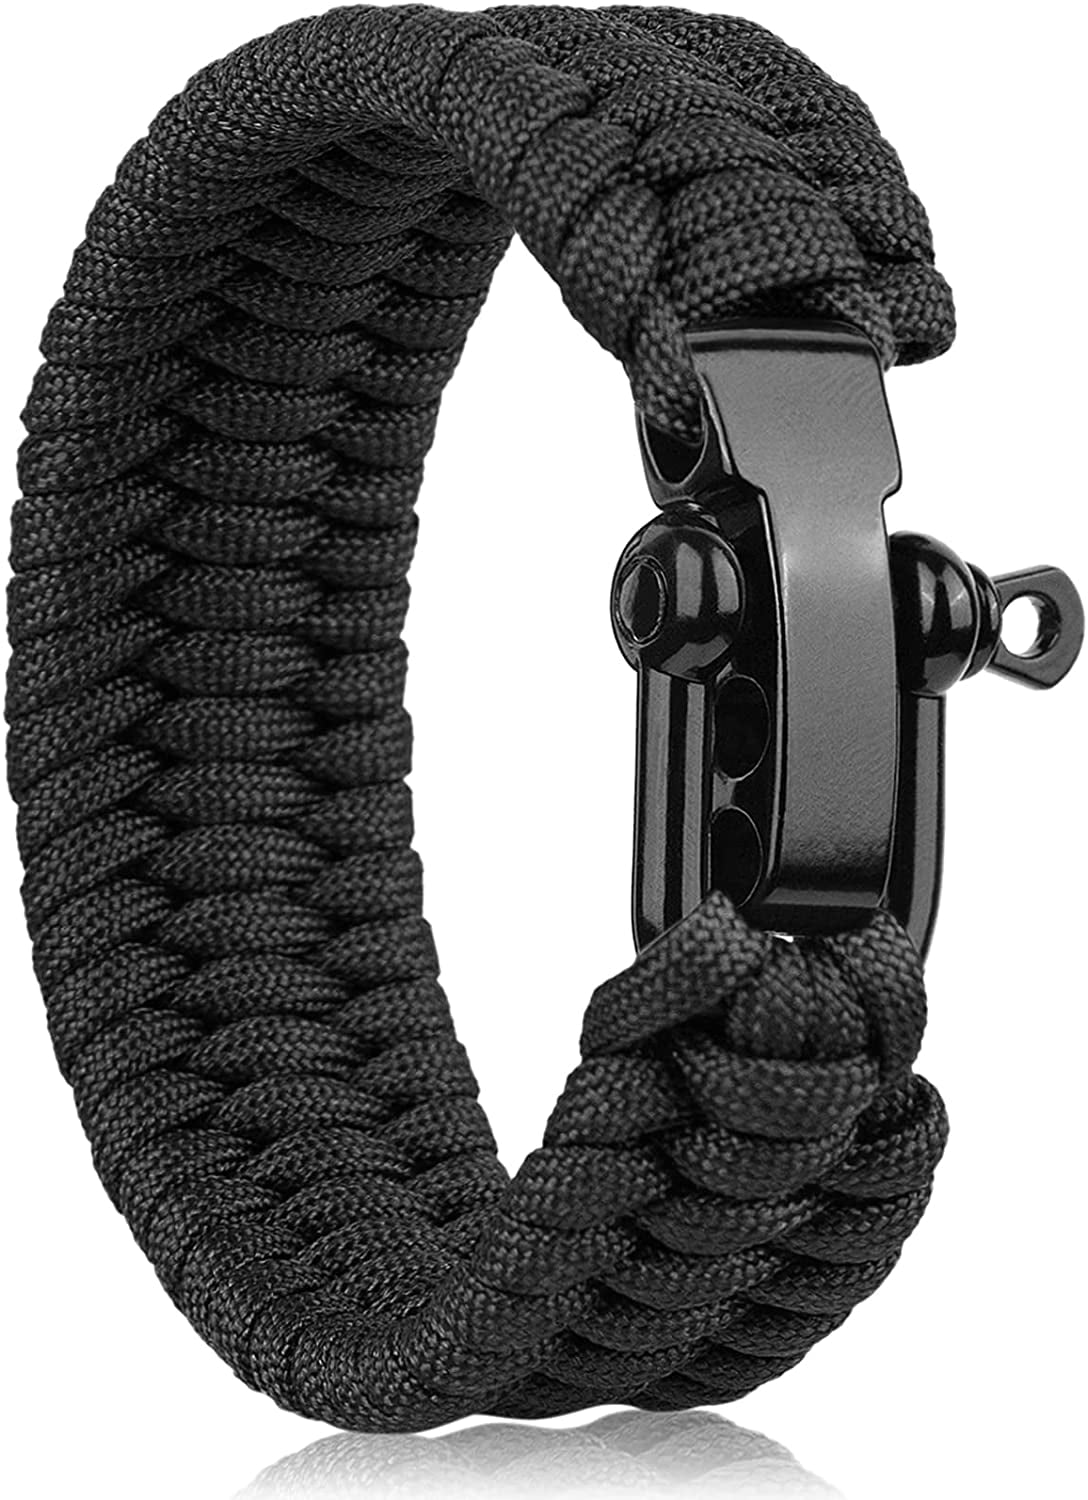 Paracord bracelet, carabiner clasp. In red and black colors. Handmade.  Unisex.